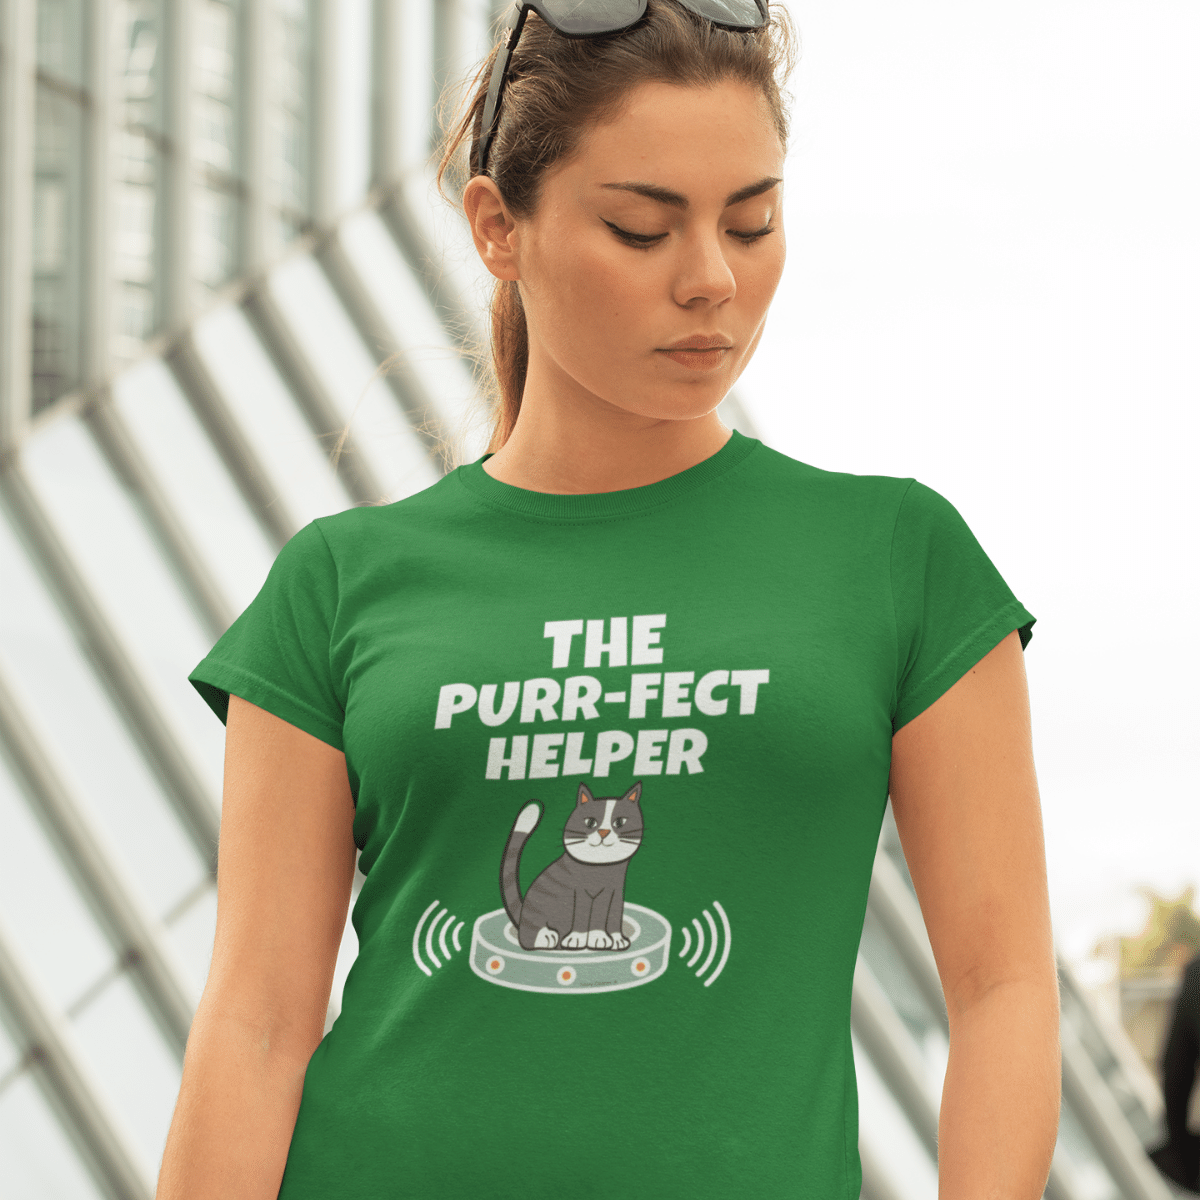 Purrfect Helper Savvy Cleaner Funny Cleaning Shirts Women's Tee